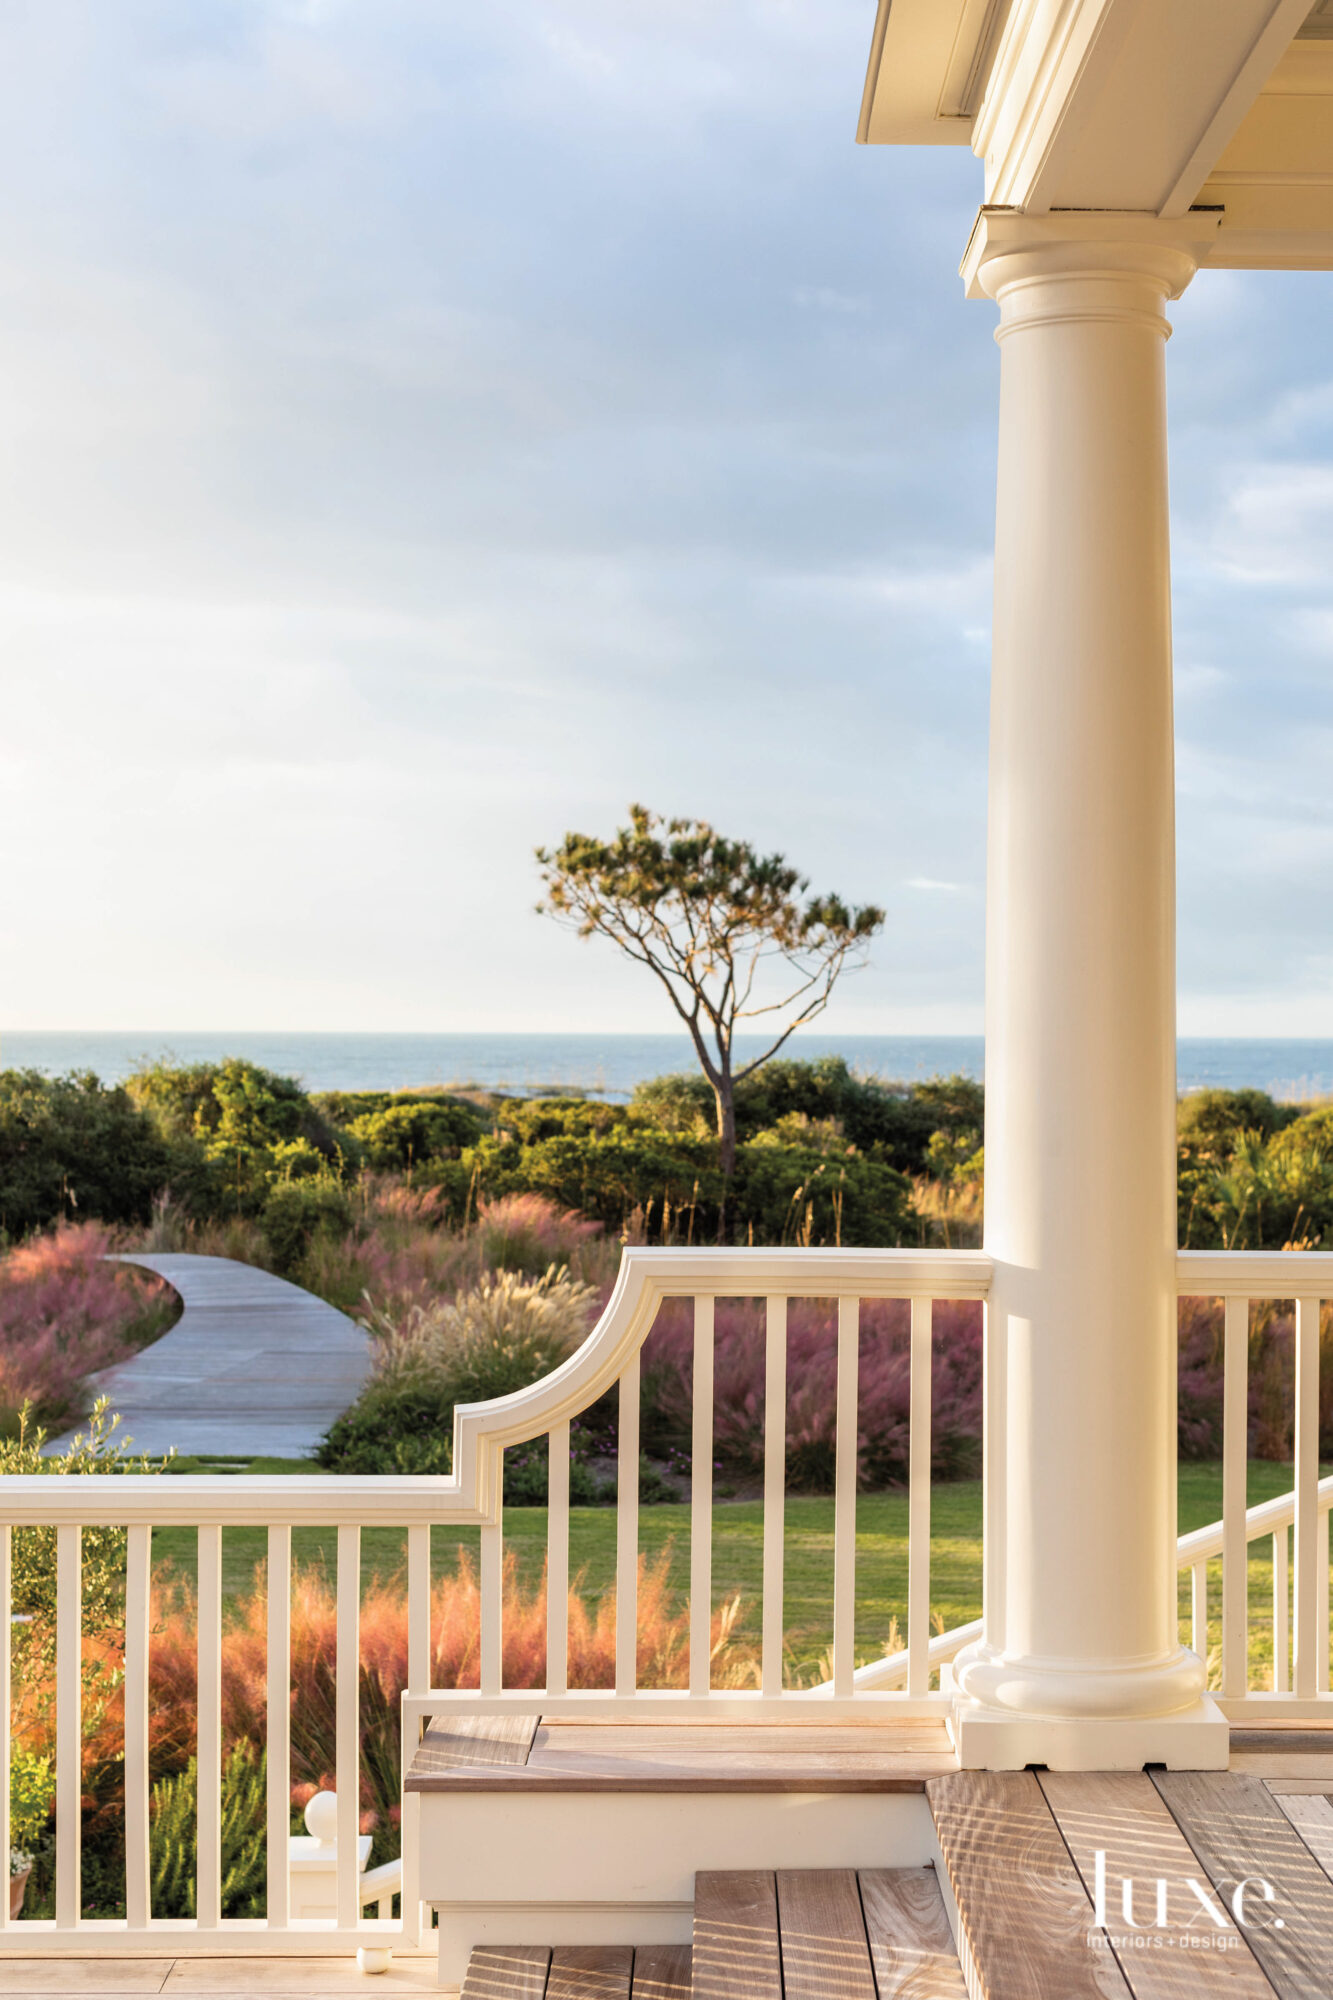 Porch railing and column with view of ocean, boardwalk and native plants